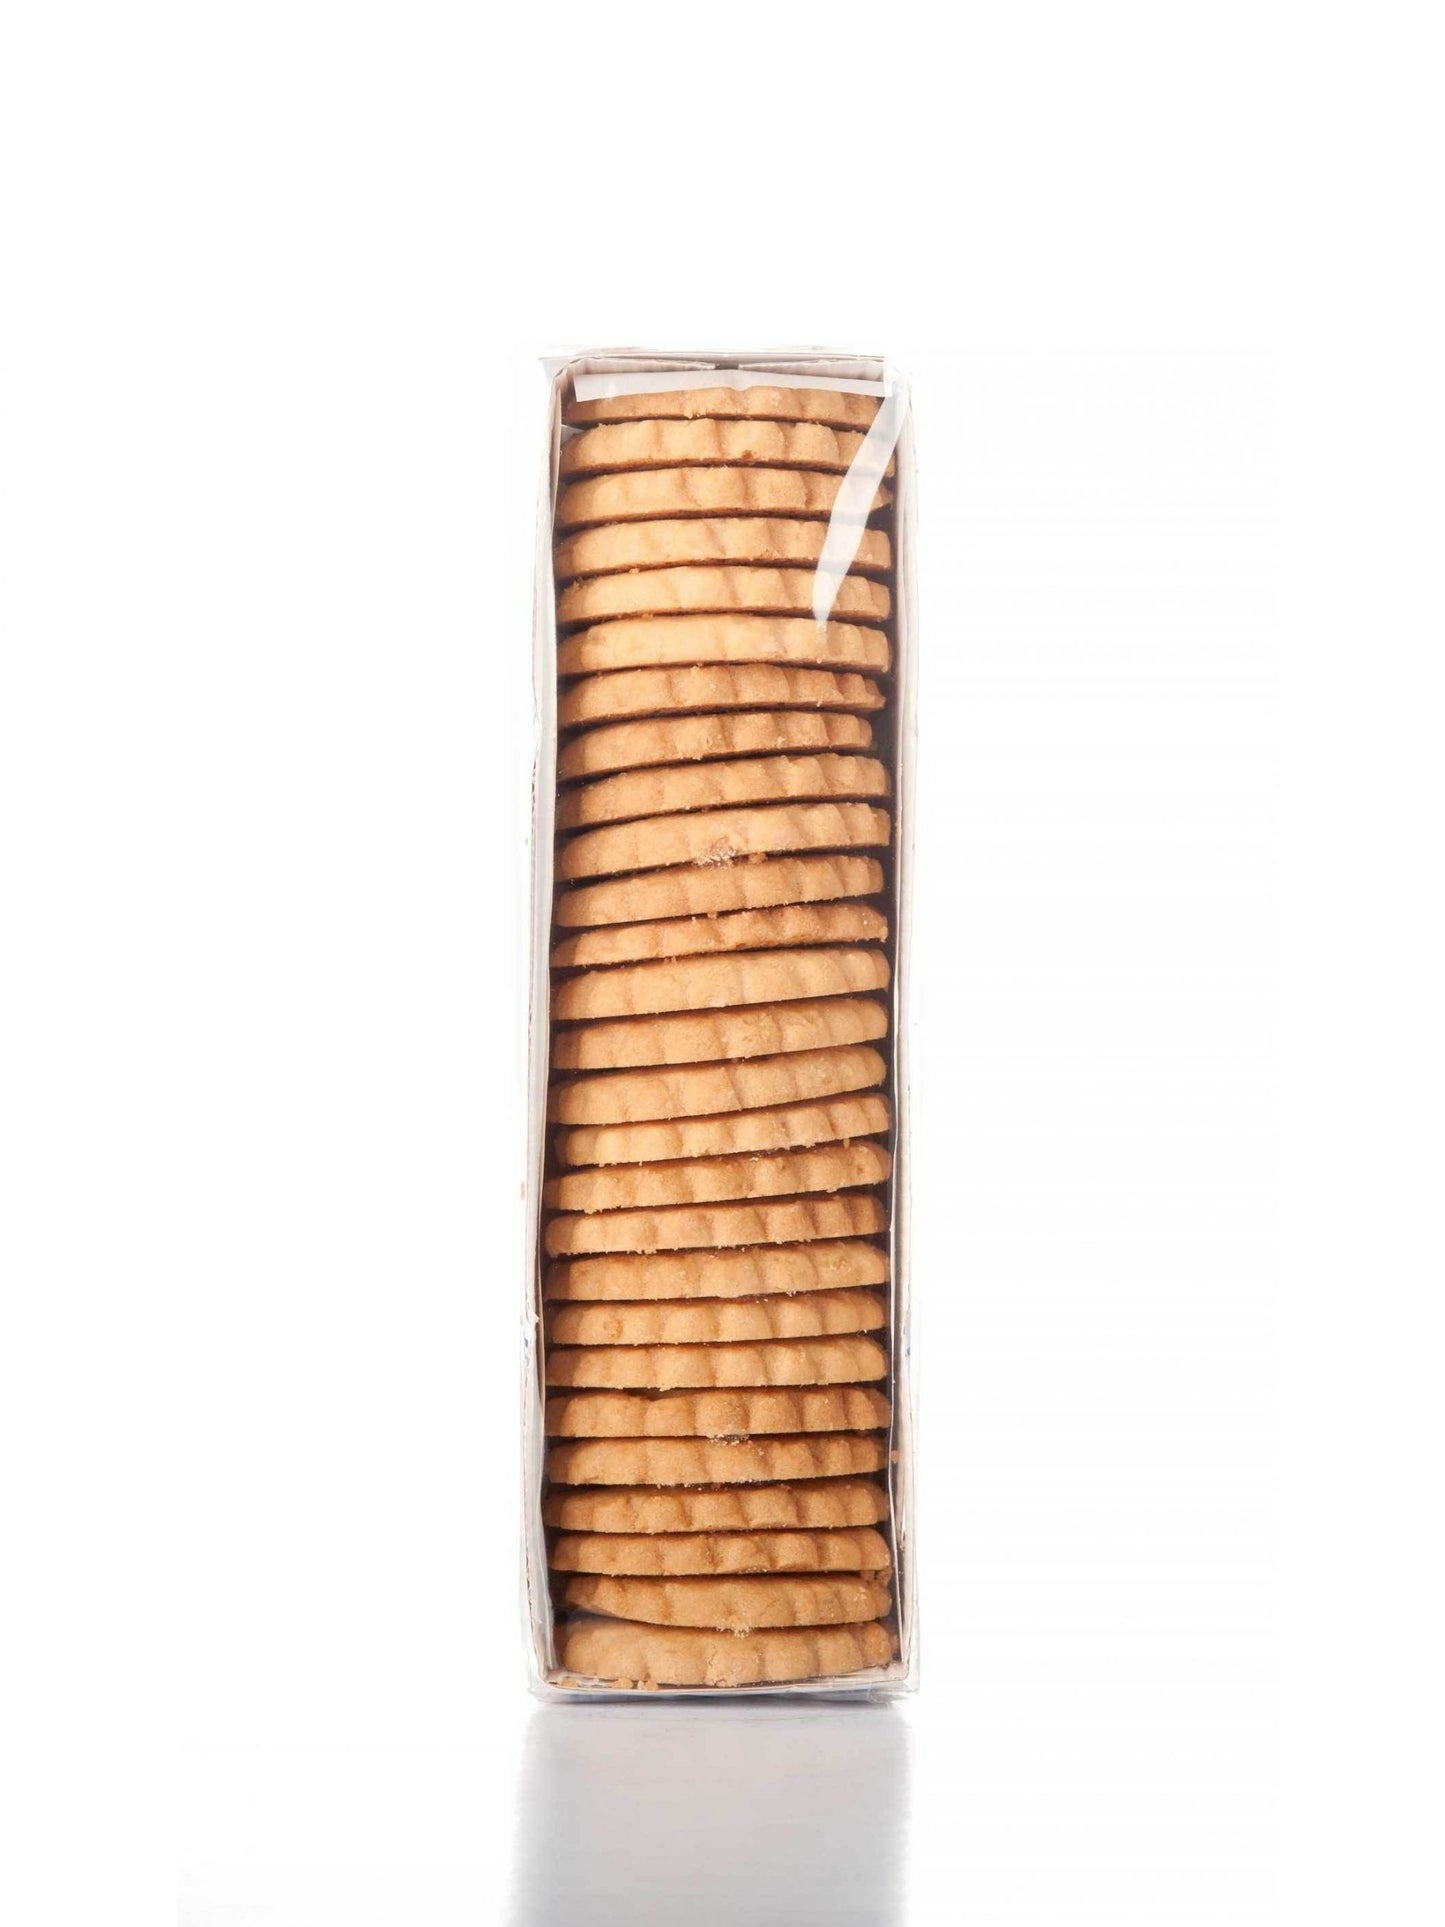 Shortbread biscuits from Asnelles - Artisanal biscuits from Quinéville - 250g